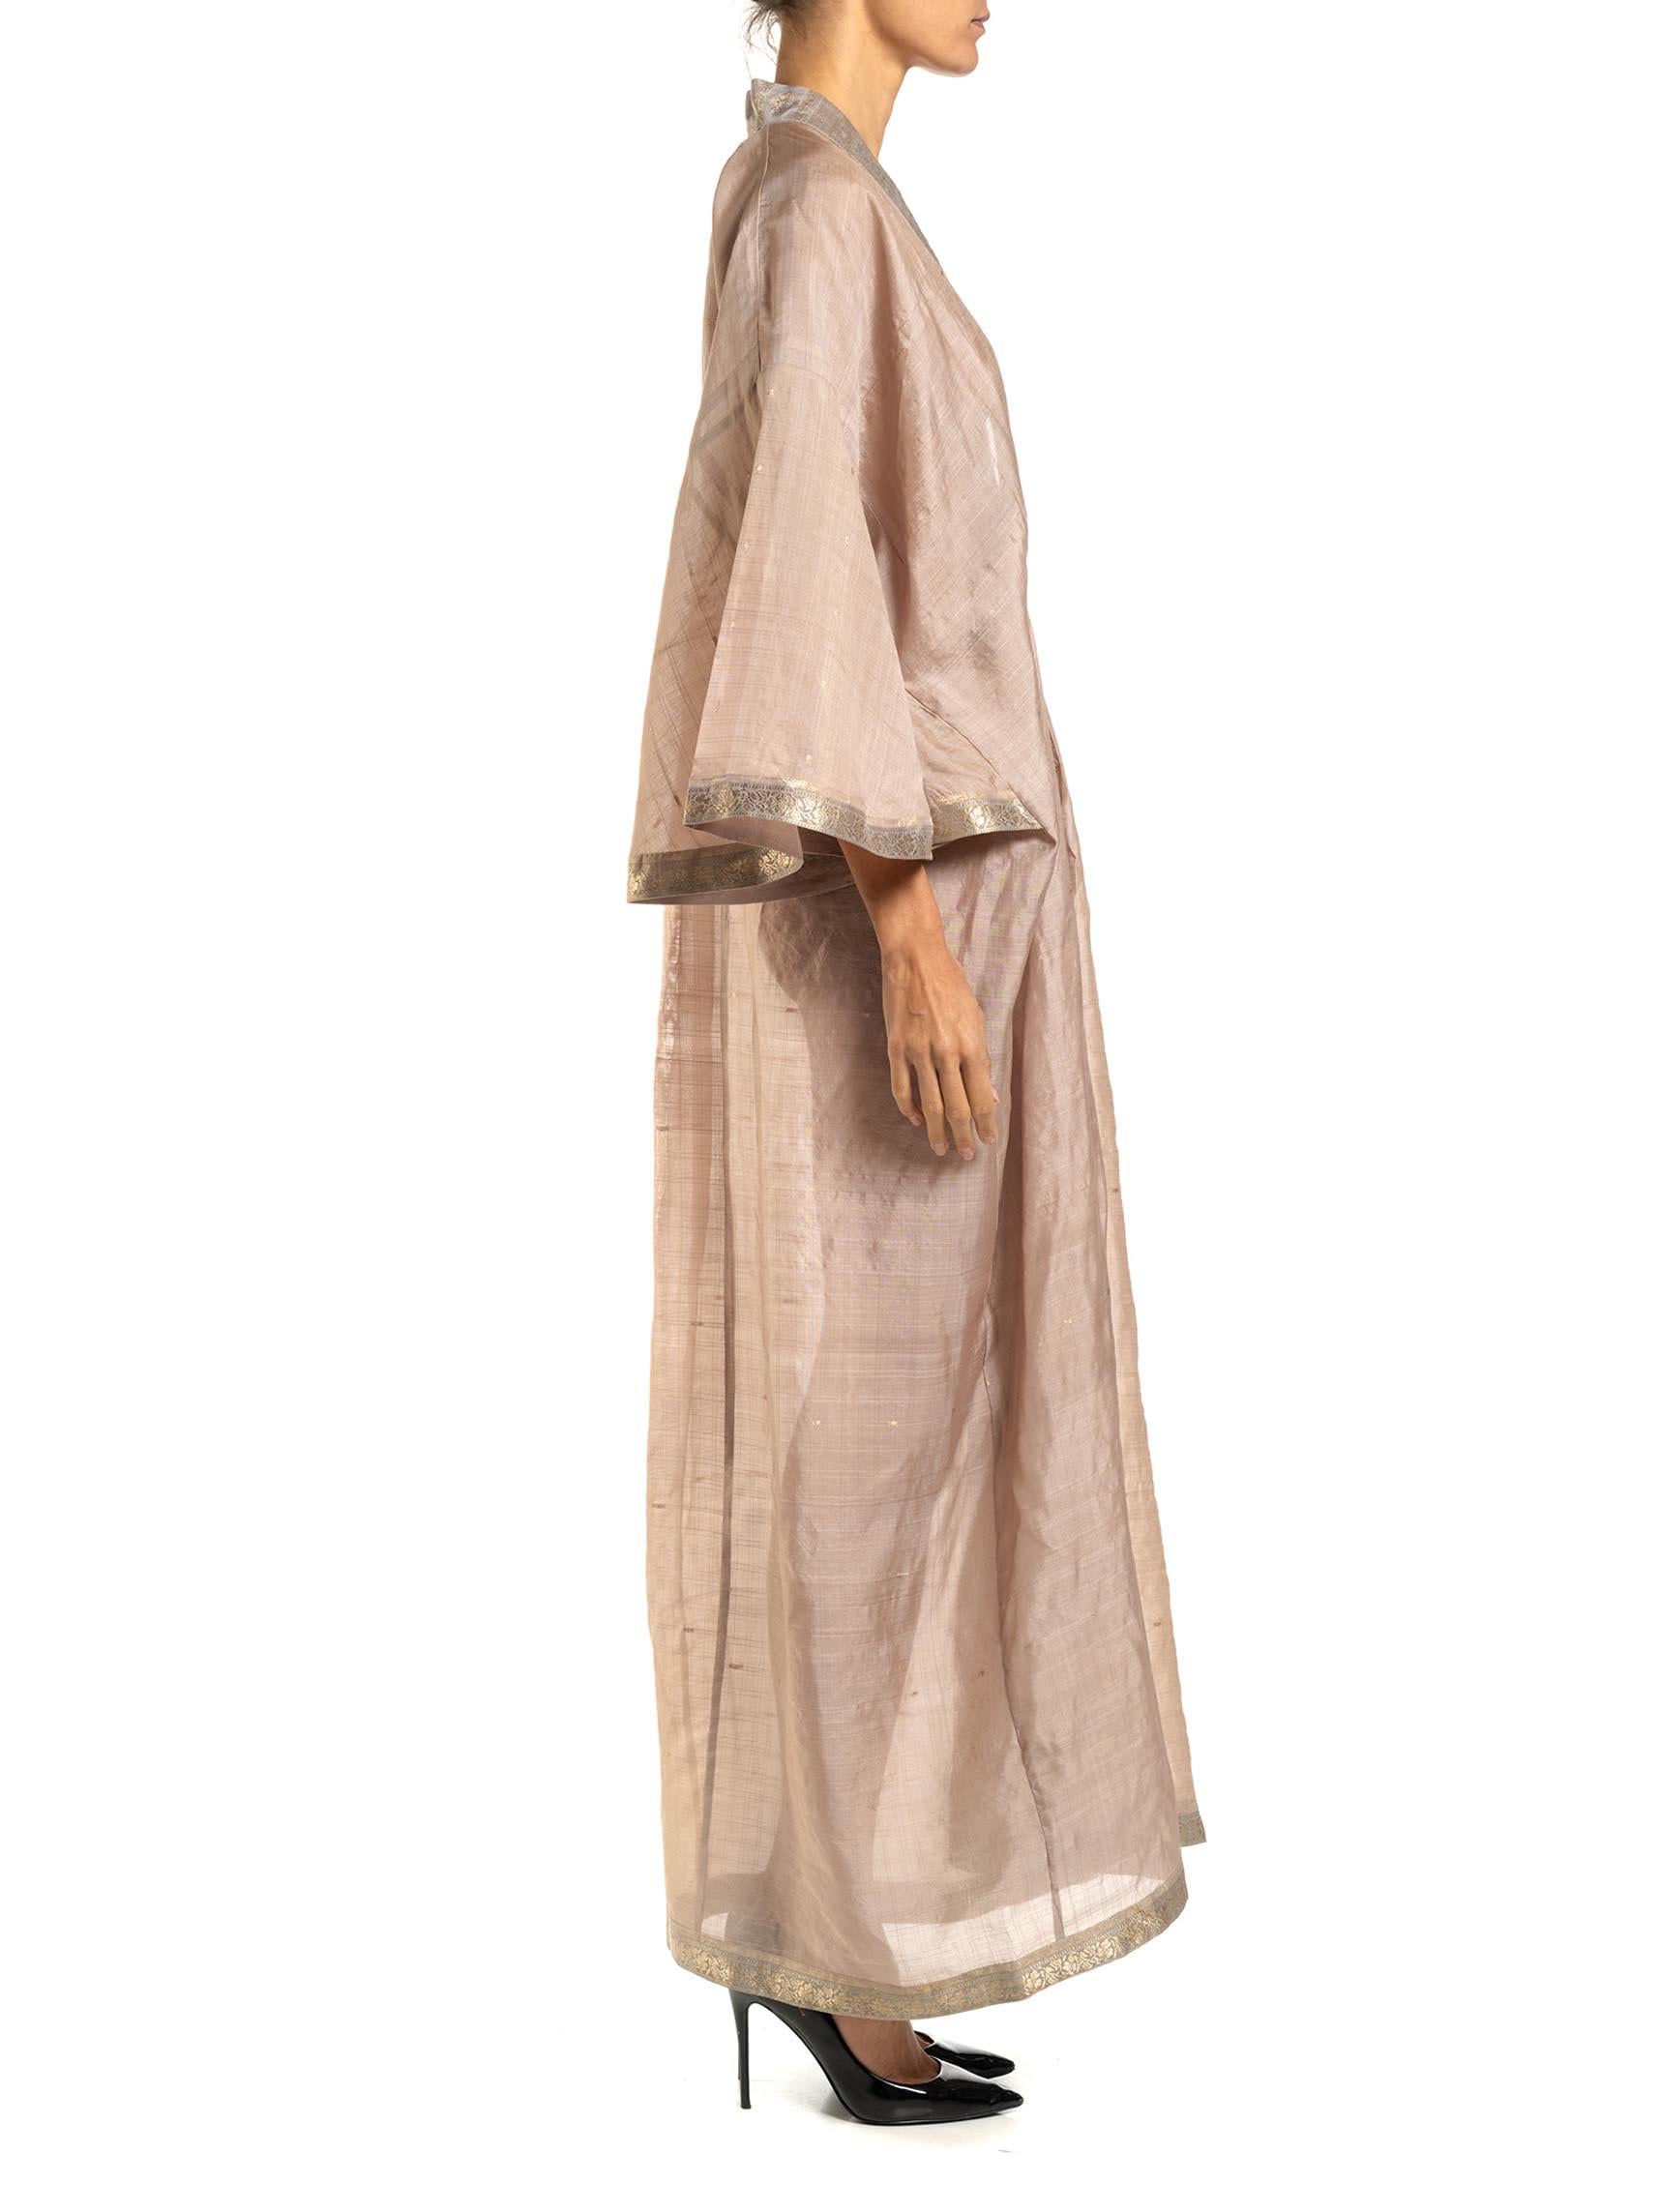 MORPHEW COLLECTION Dusty Pink Silk Kaftan Made From Vintage Sari In Excellent Condition For Sale In New York, NY